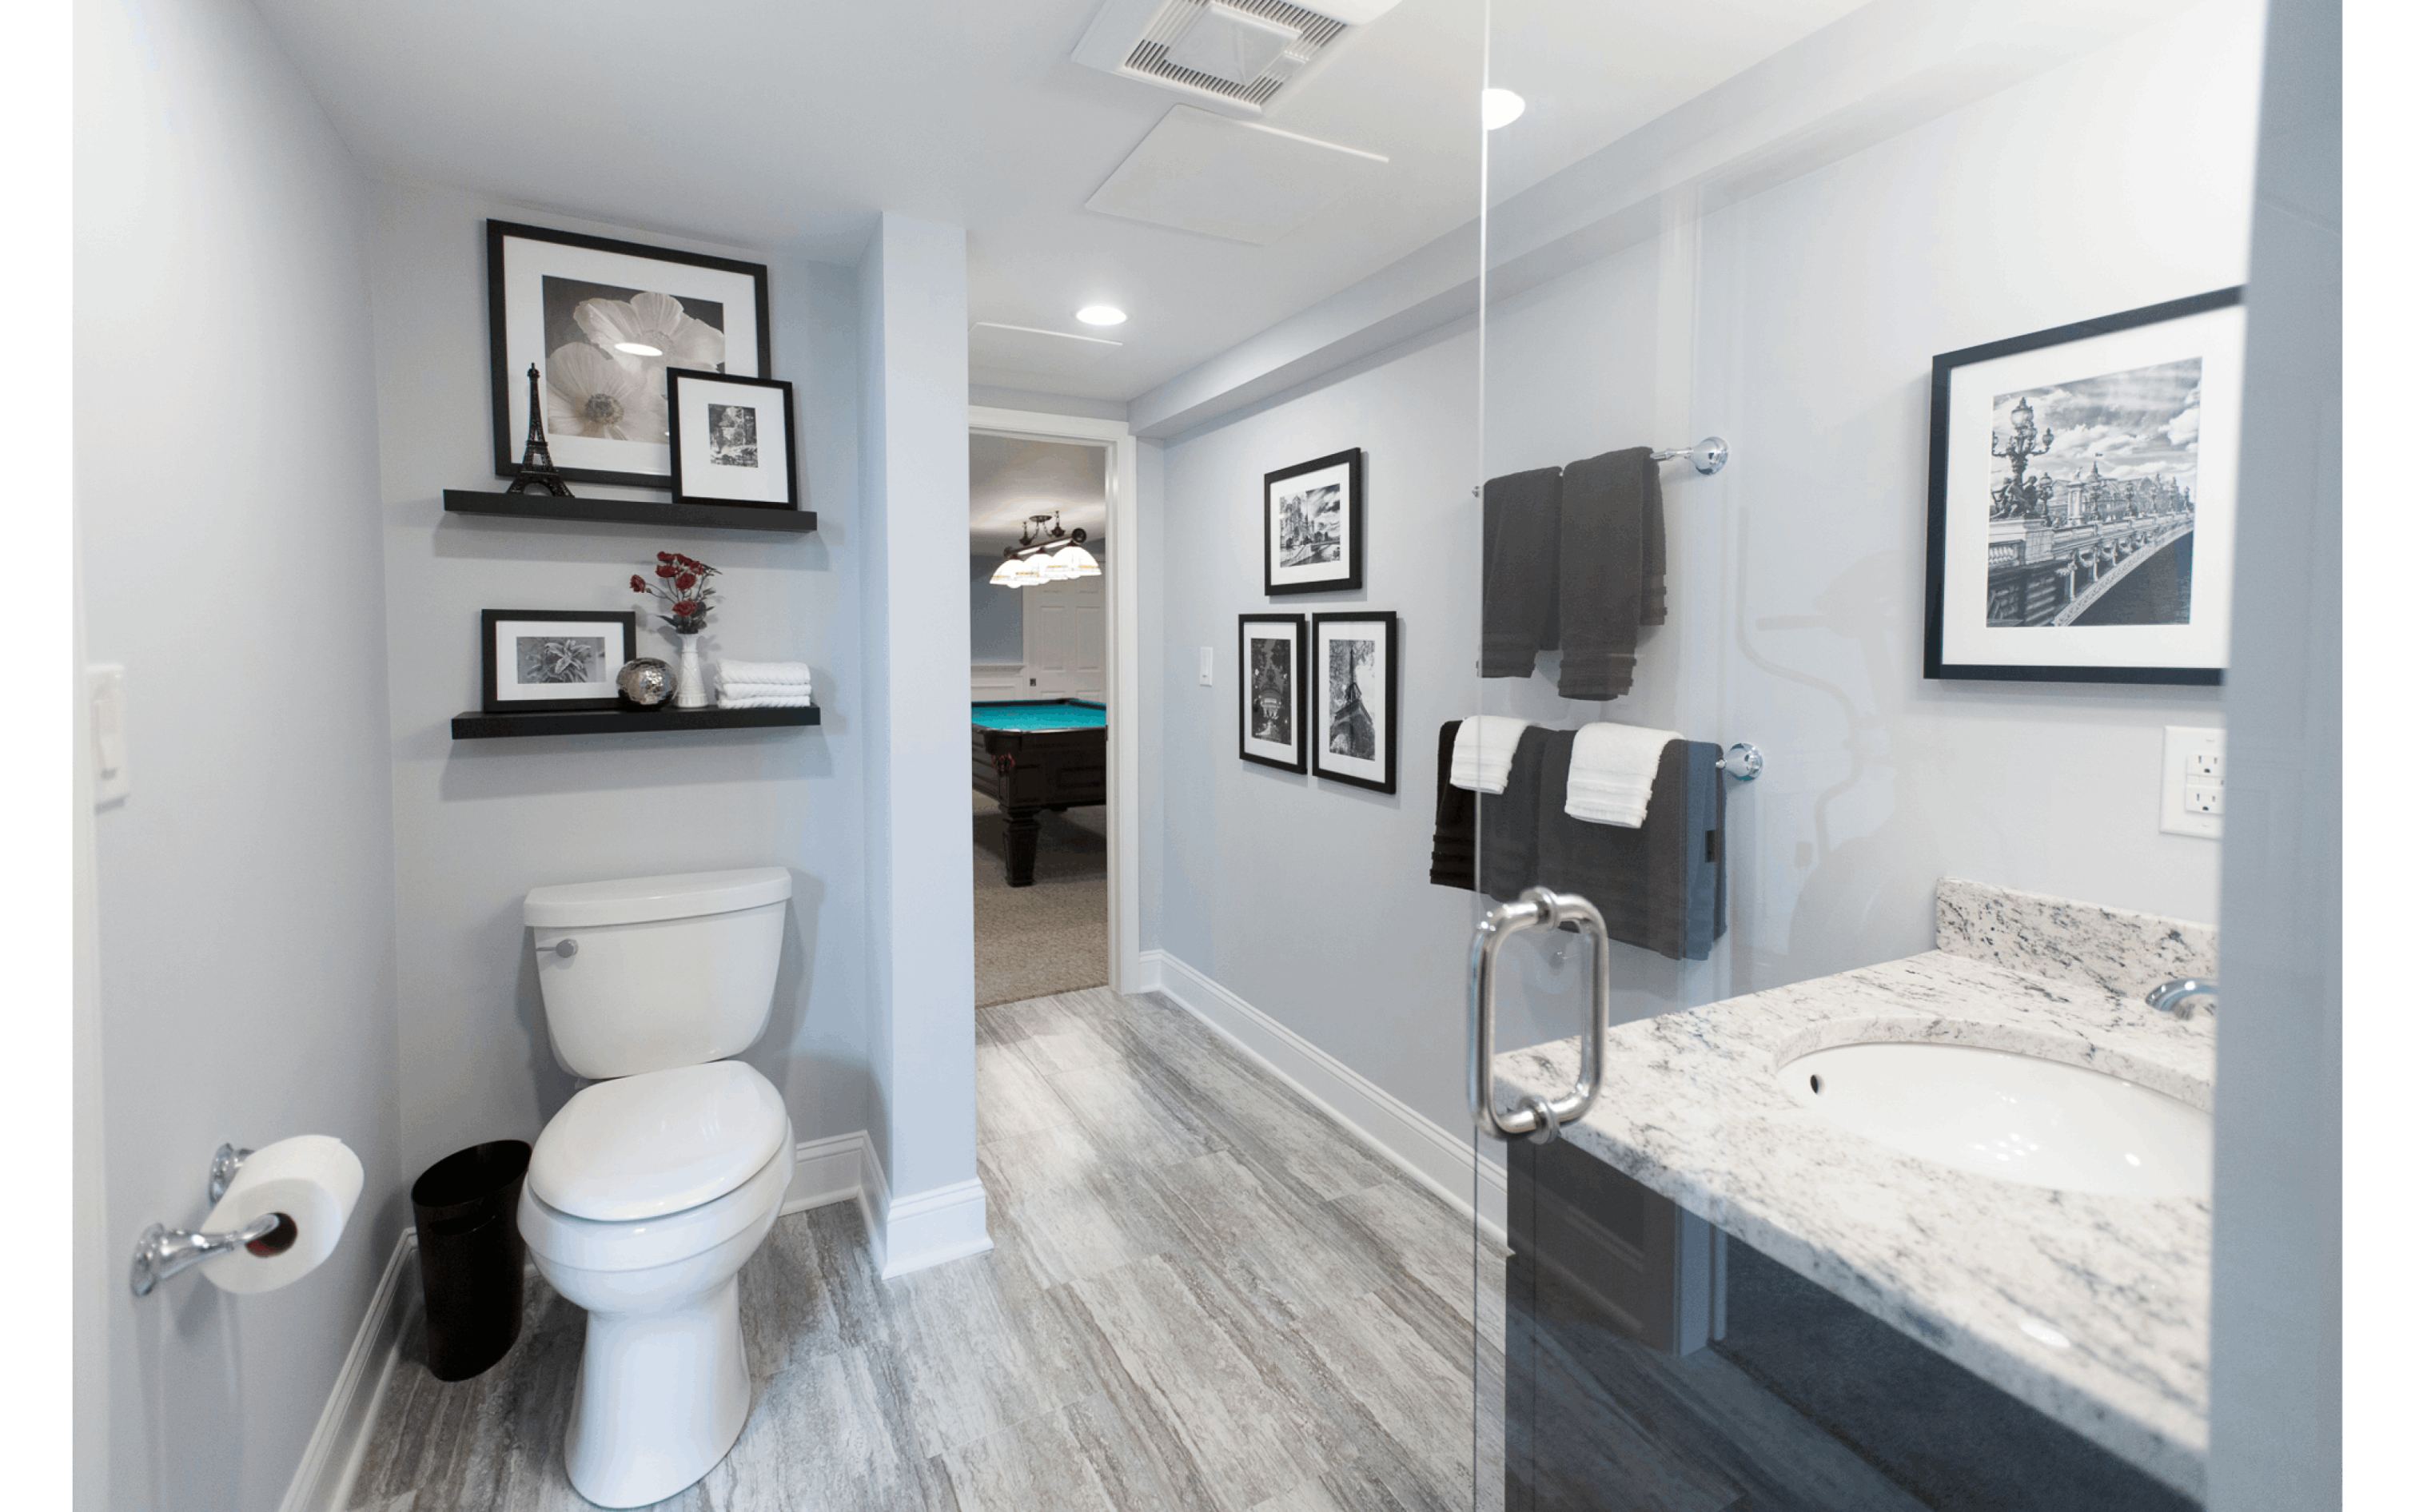 Upgraded basement bathroom with private toilet niche, glass shower and granite vanity, overlooking pool table in the next room